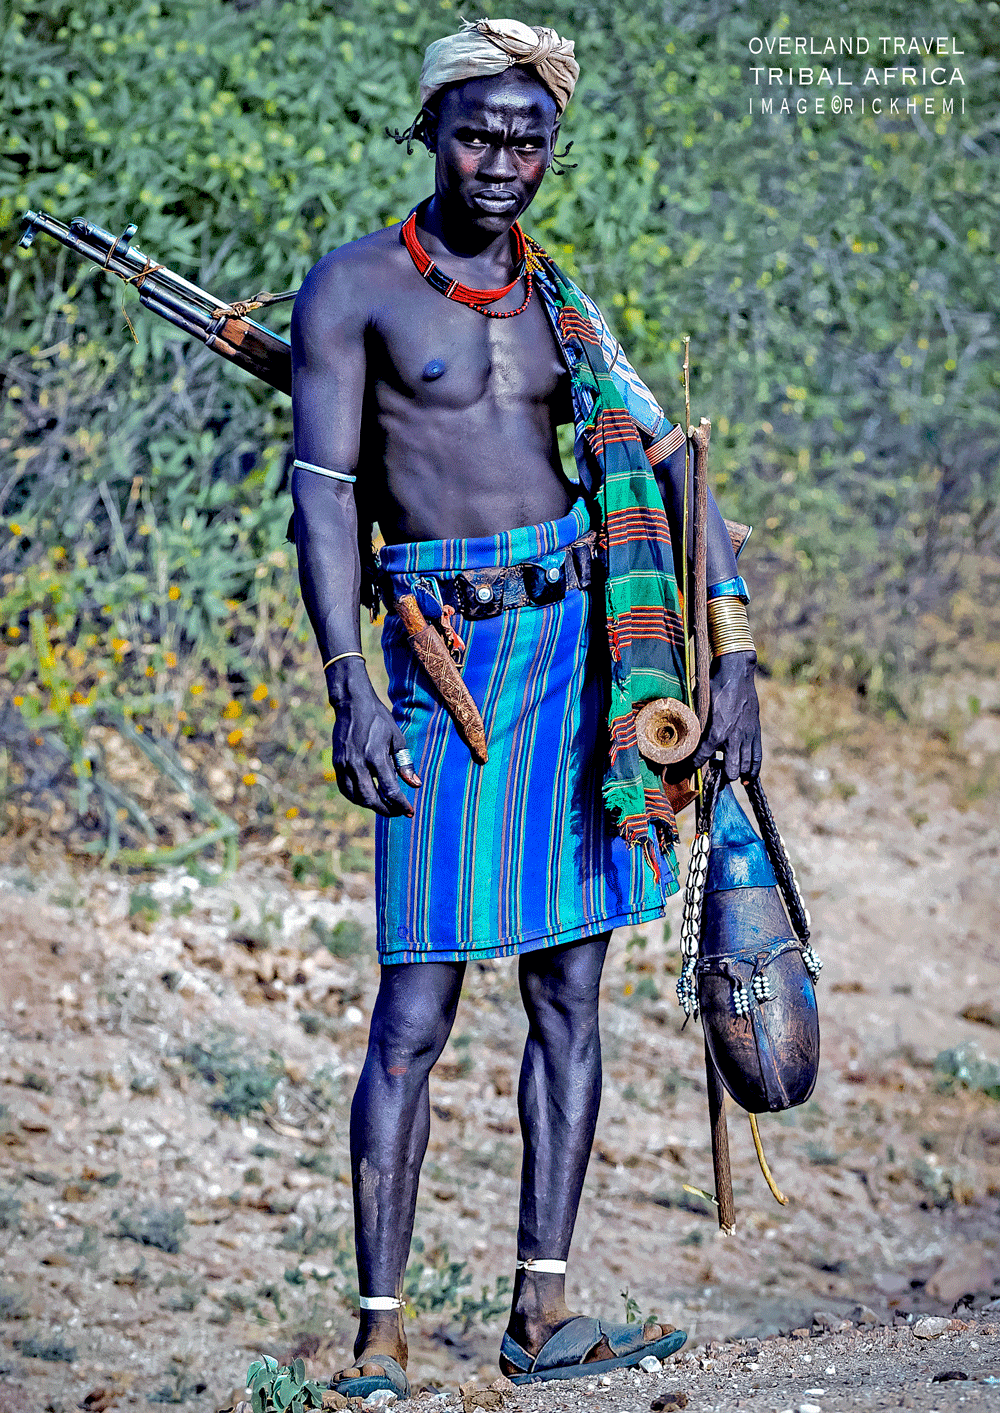 solo overland travel and transit Africa, solo travel Africa, tribal lands Africa, image by Rick Hemi